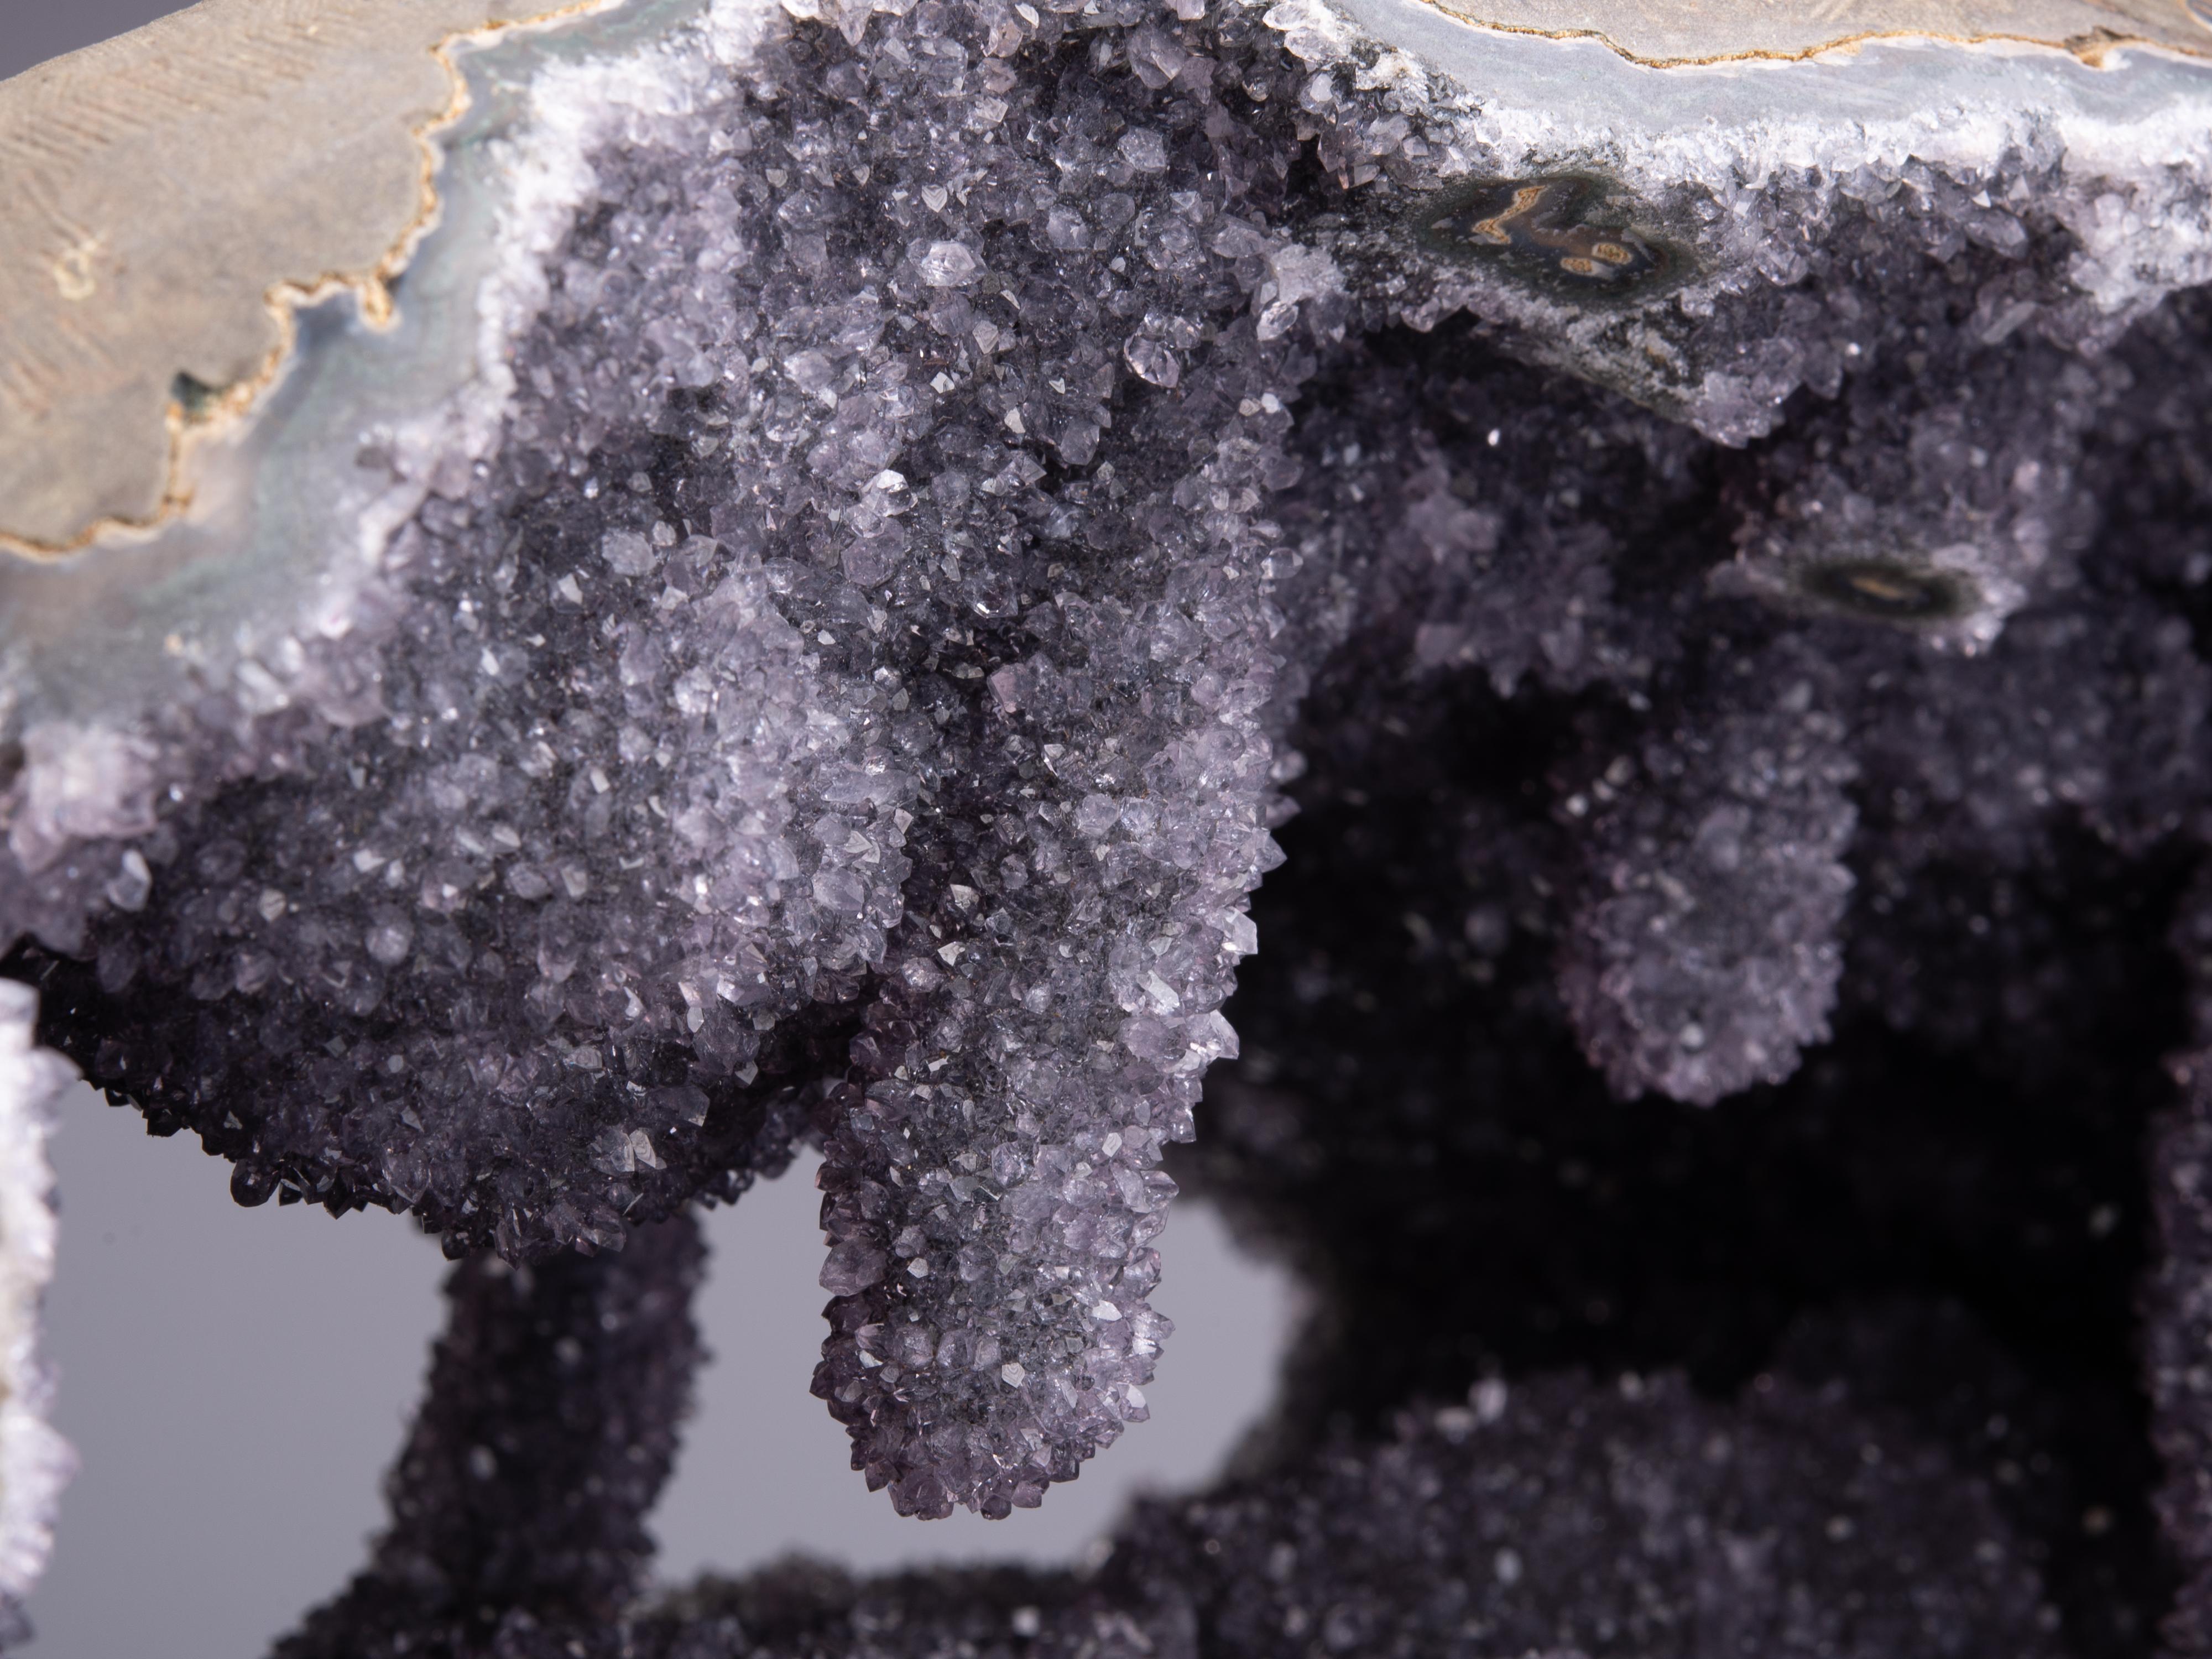 Amazing Geode with Stalactites and Stalagmites with Amethyst and Grey Druze 2